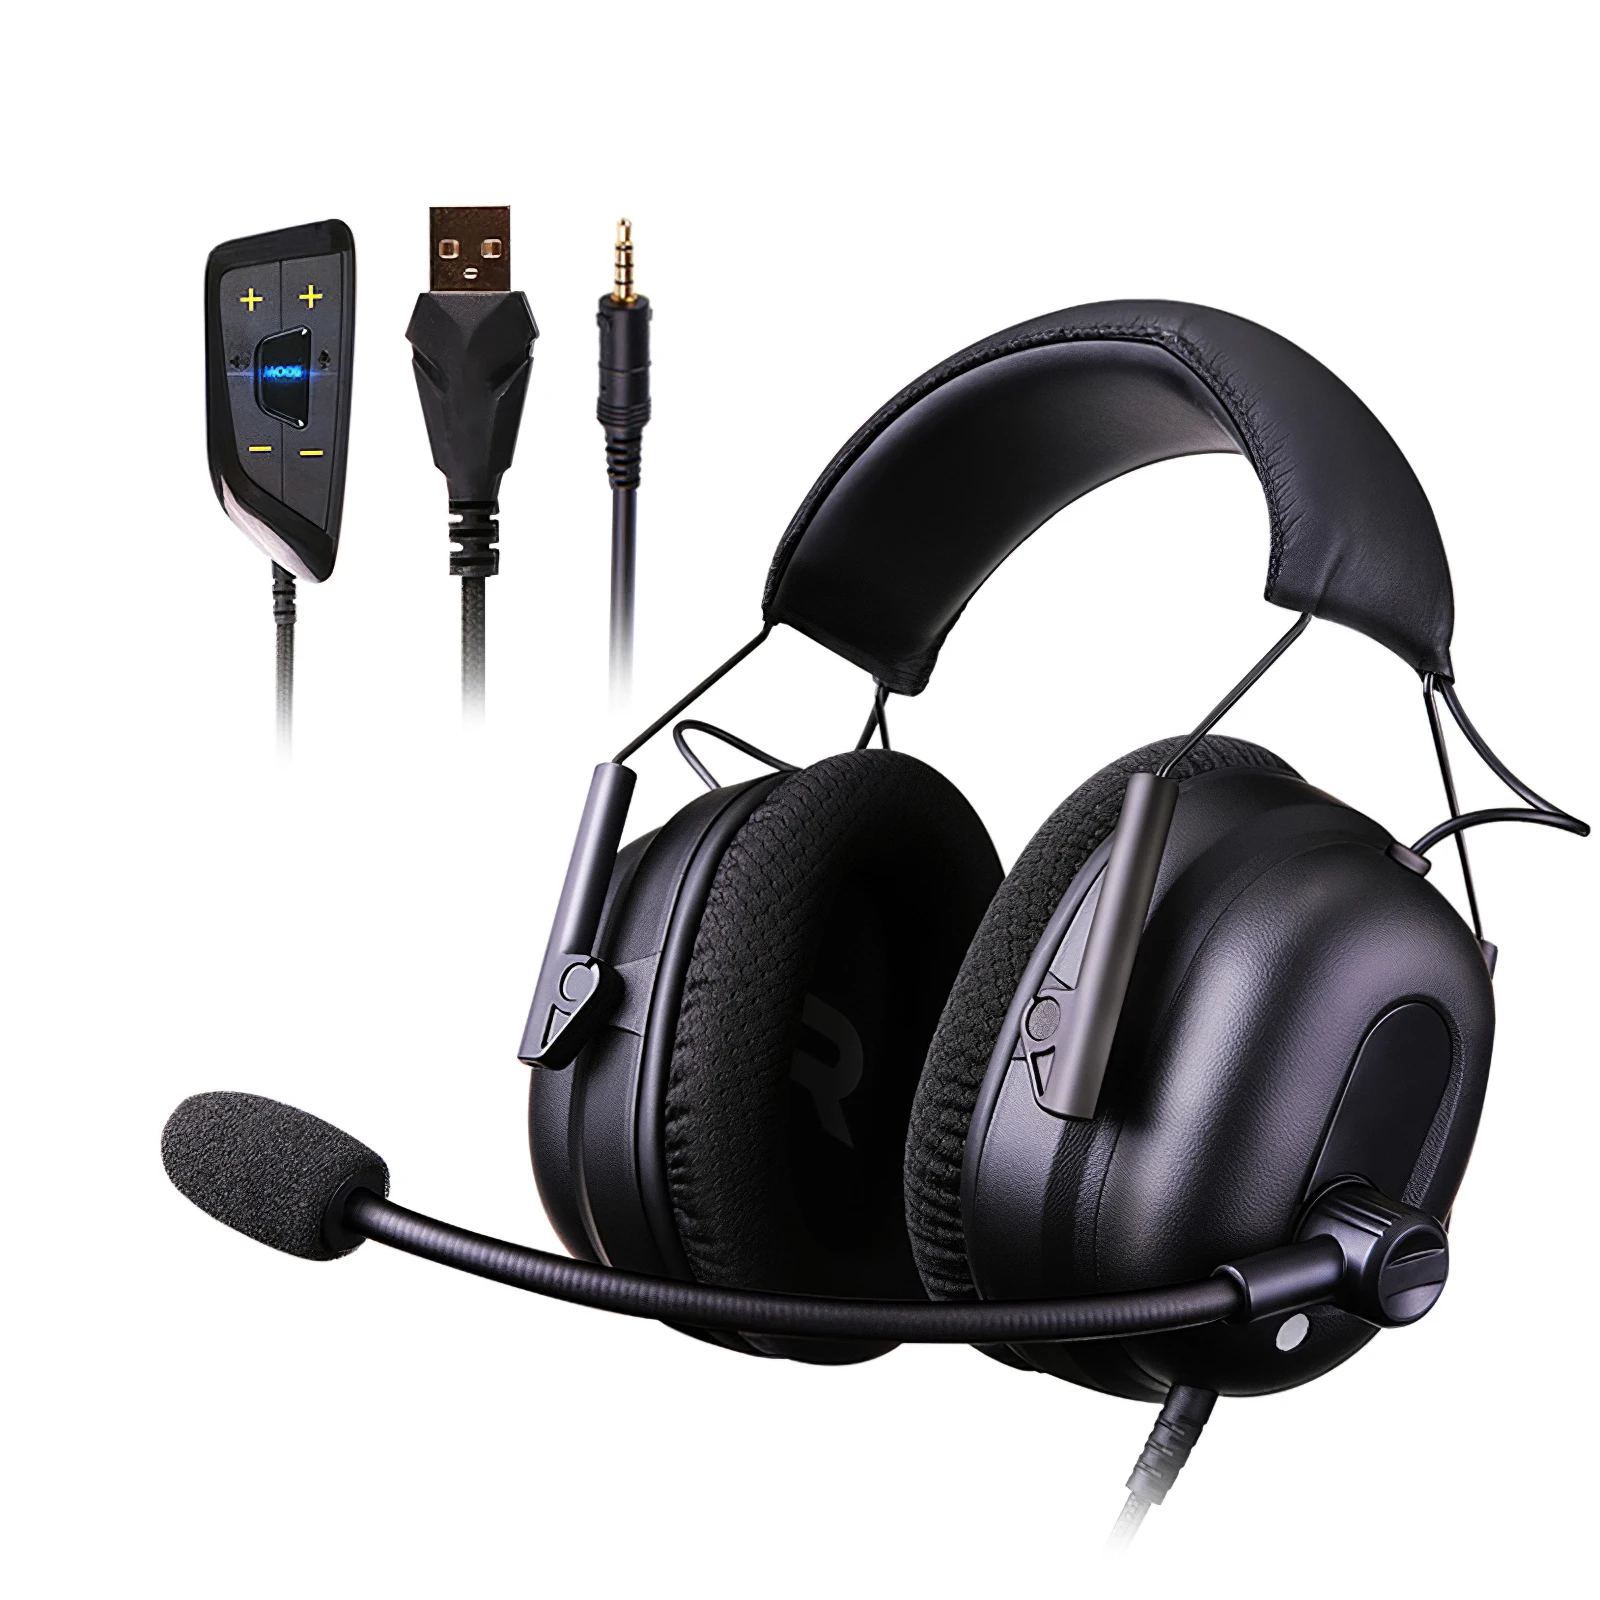 

Profession Gaming Headset Built-in Virtual 7.1 Channel Headphone fit LOL/PUBG/VIDEO Game Modes 3D Surround Sound Mic Earphone